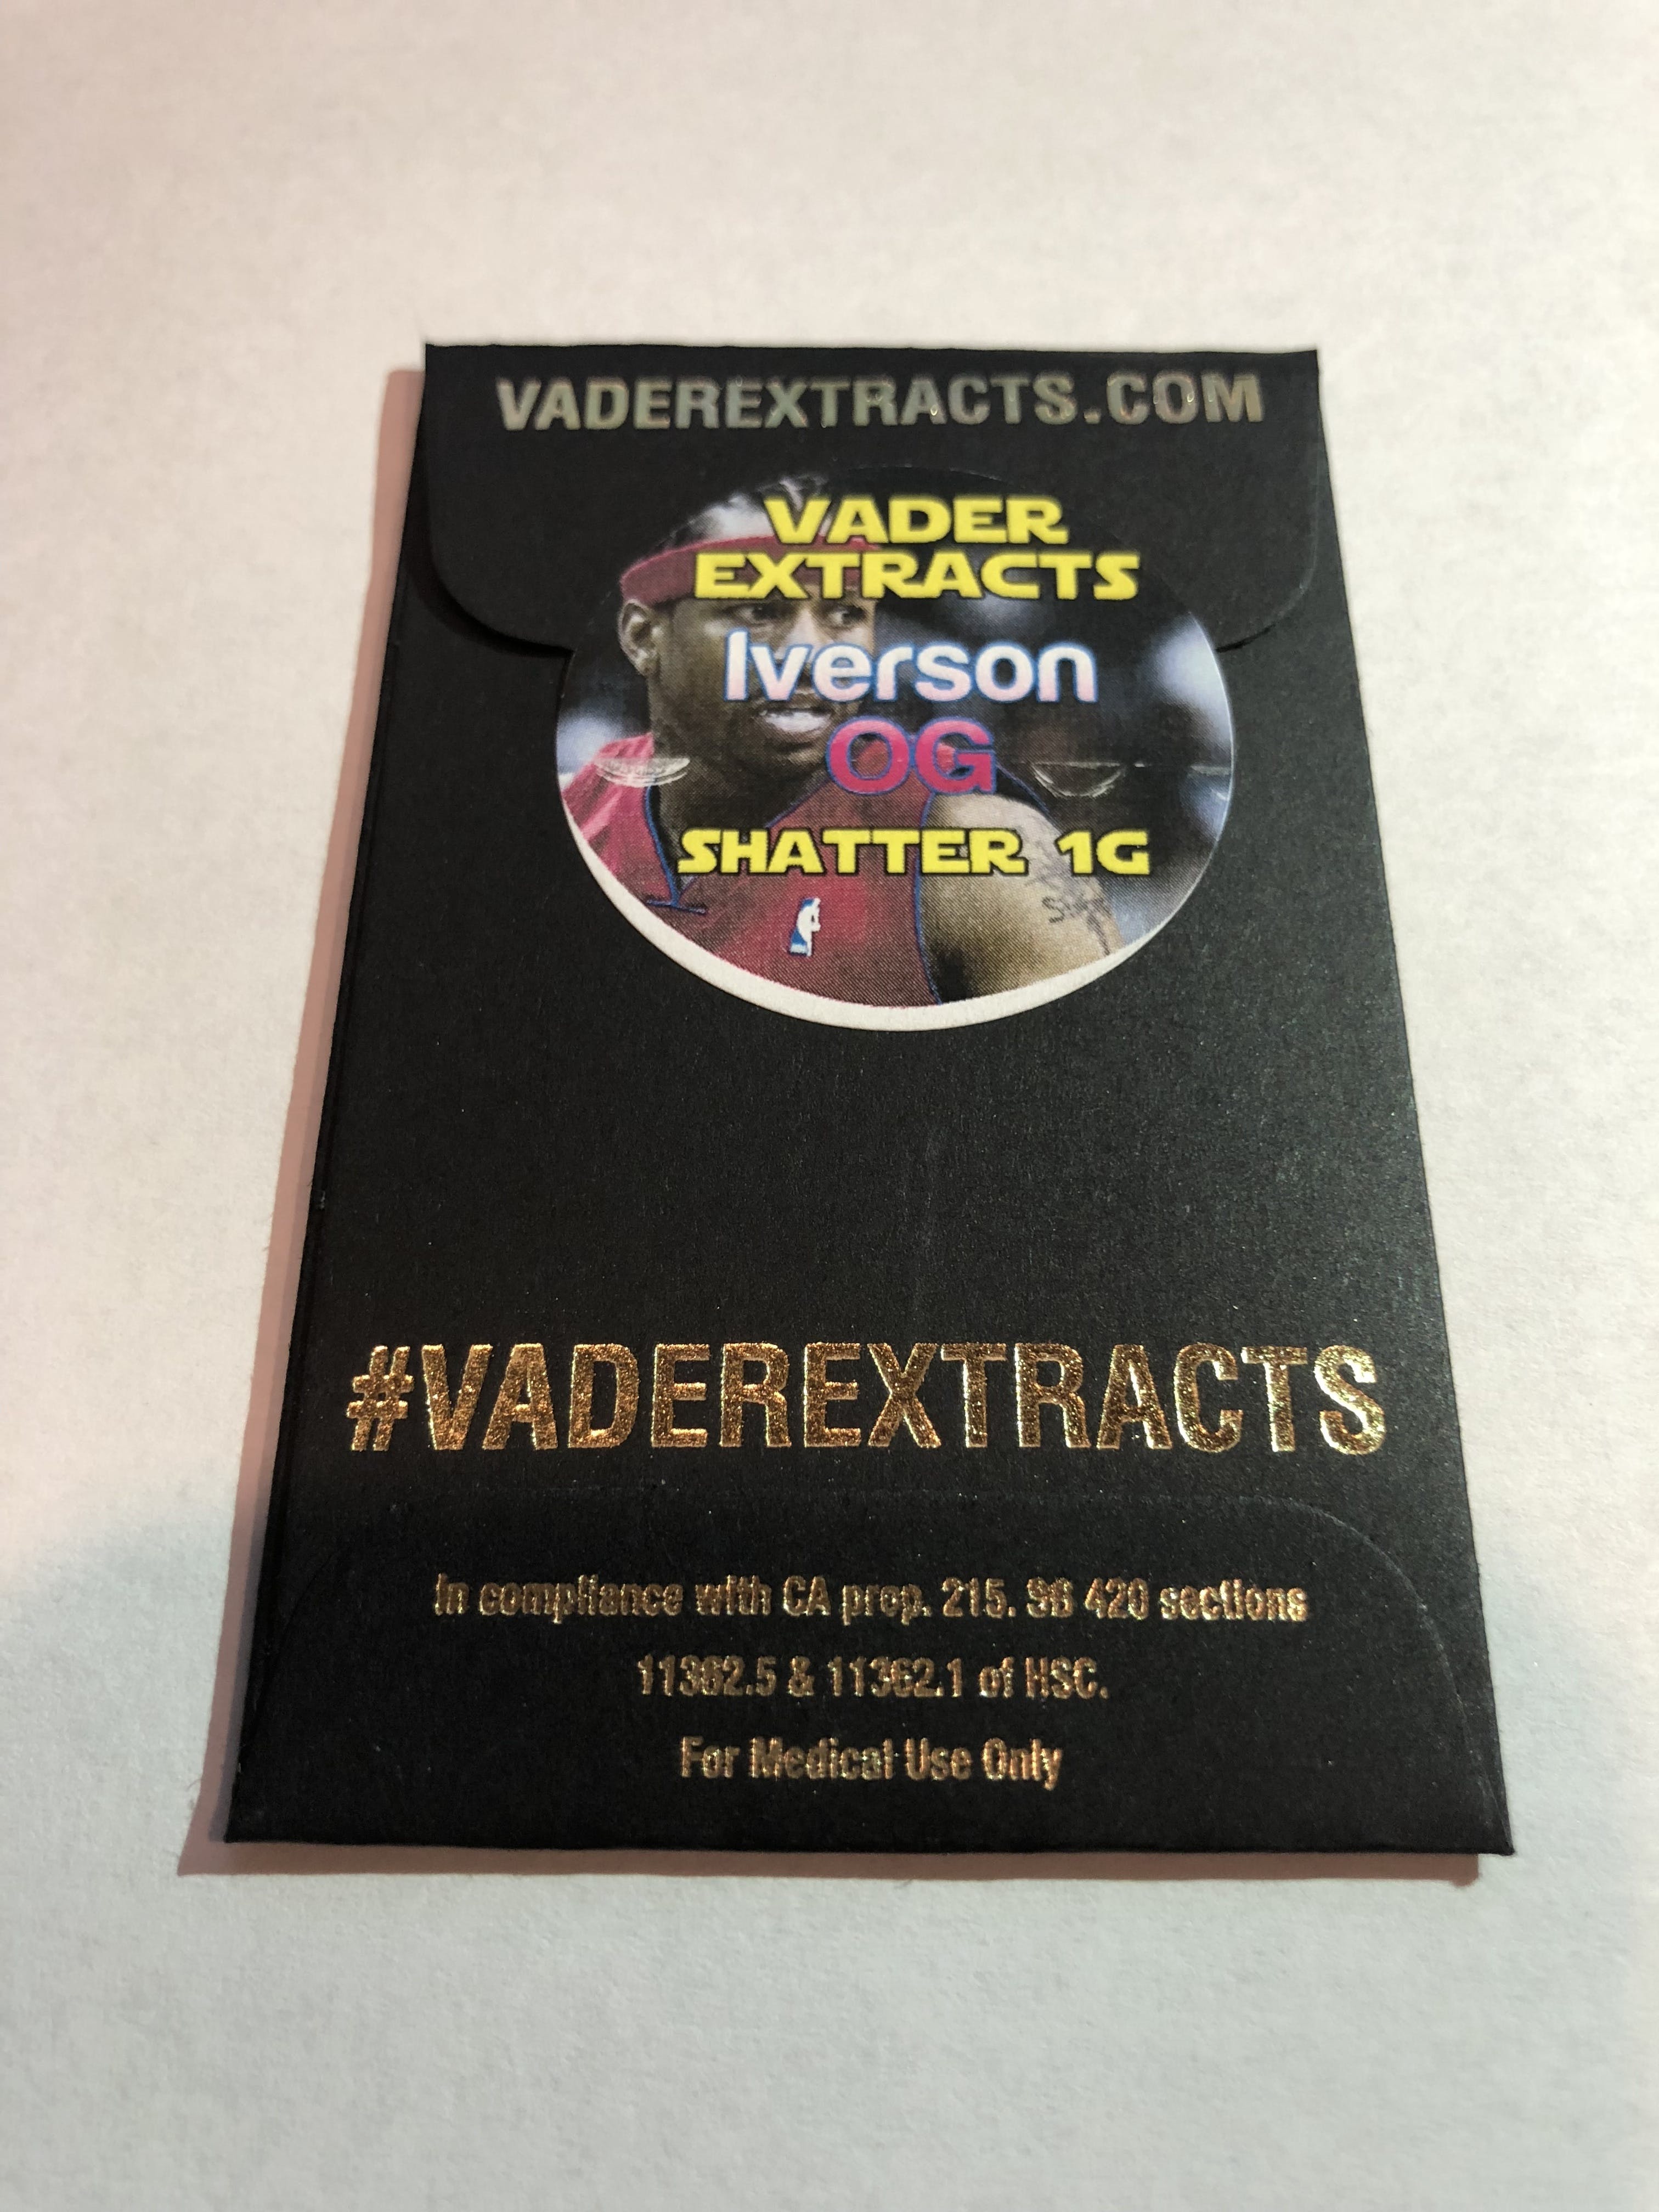 wax-vader-extracts-trim-runar-inverson-og